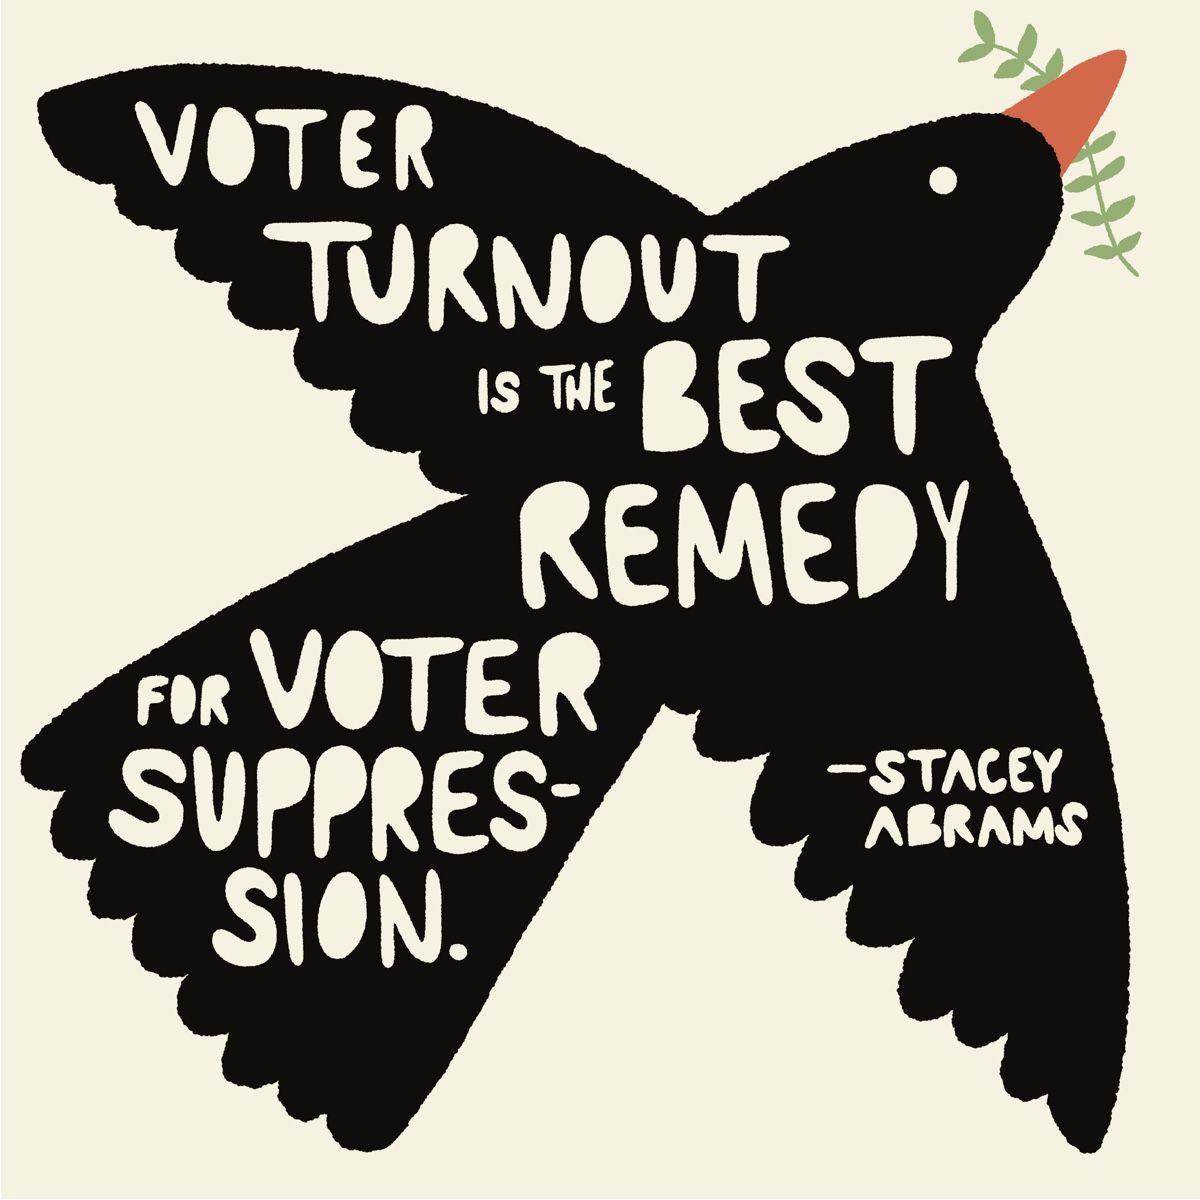 This Illustration Campaign is Firing Us Up to Vote